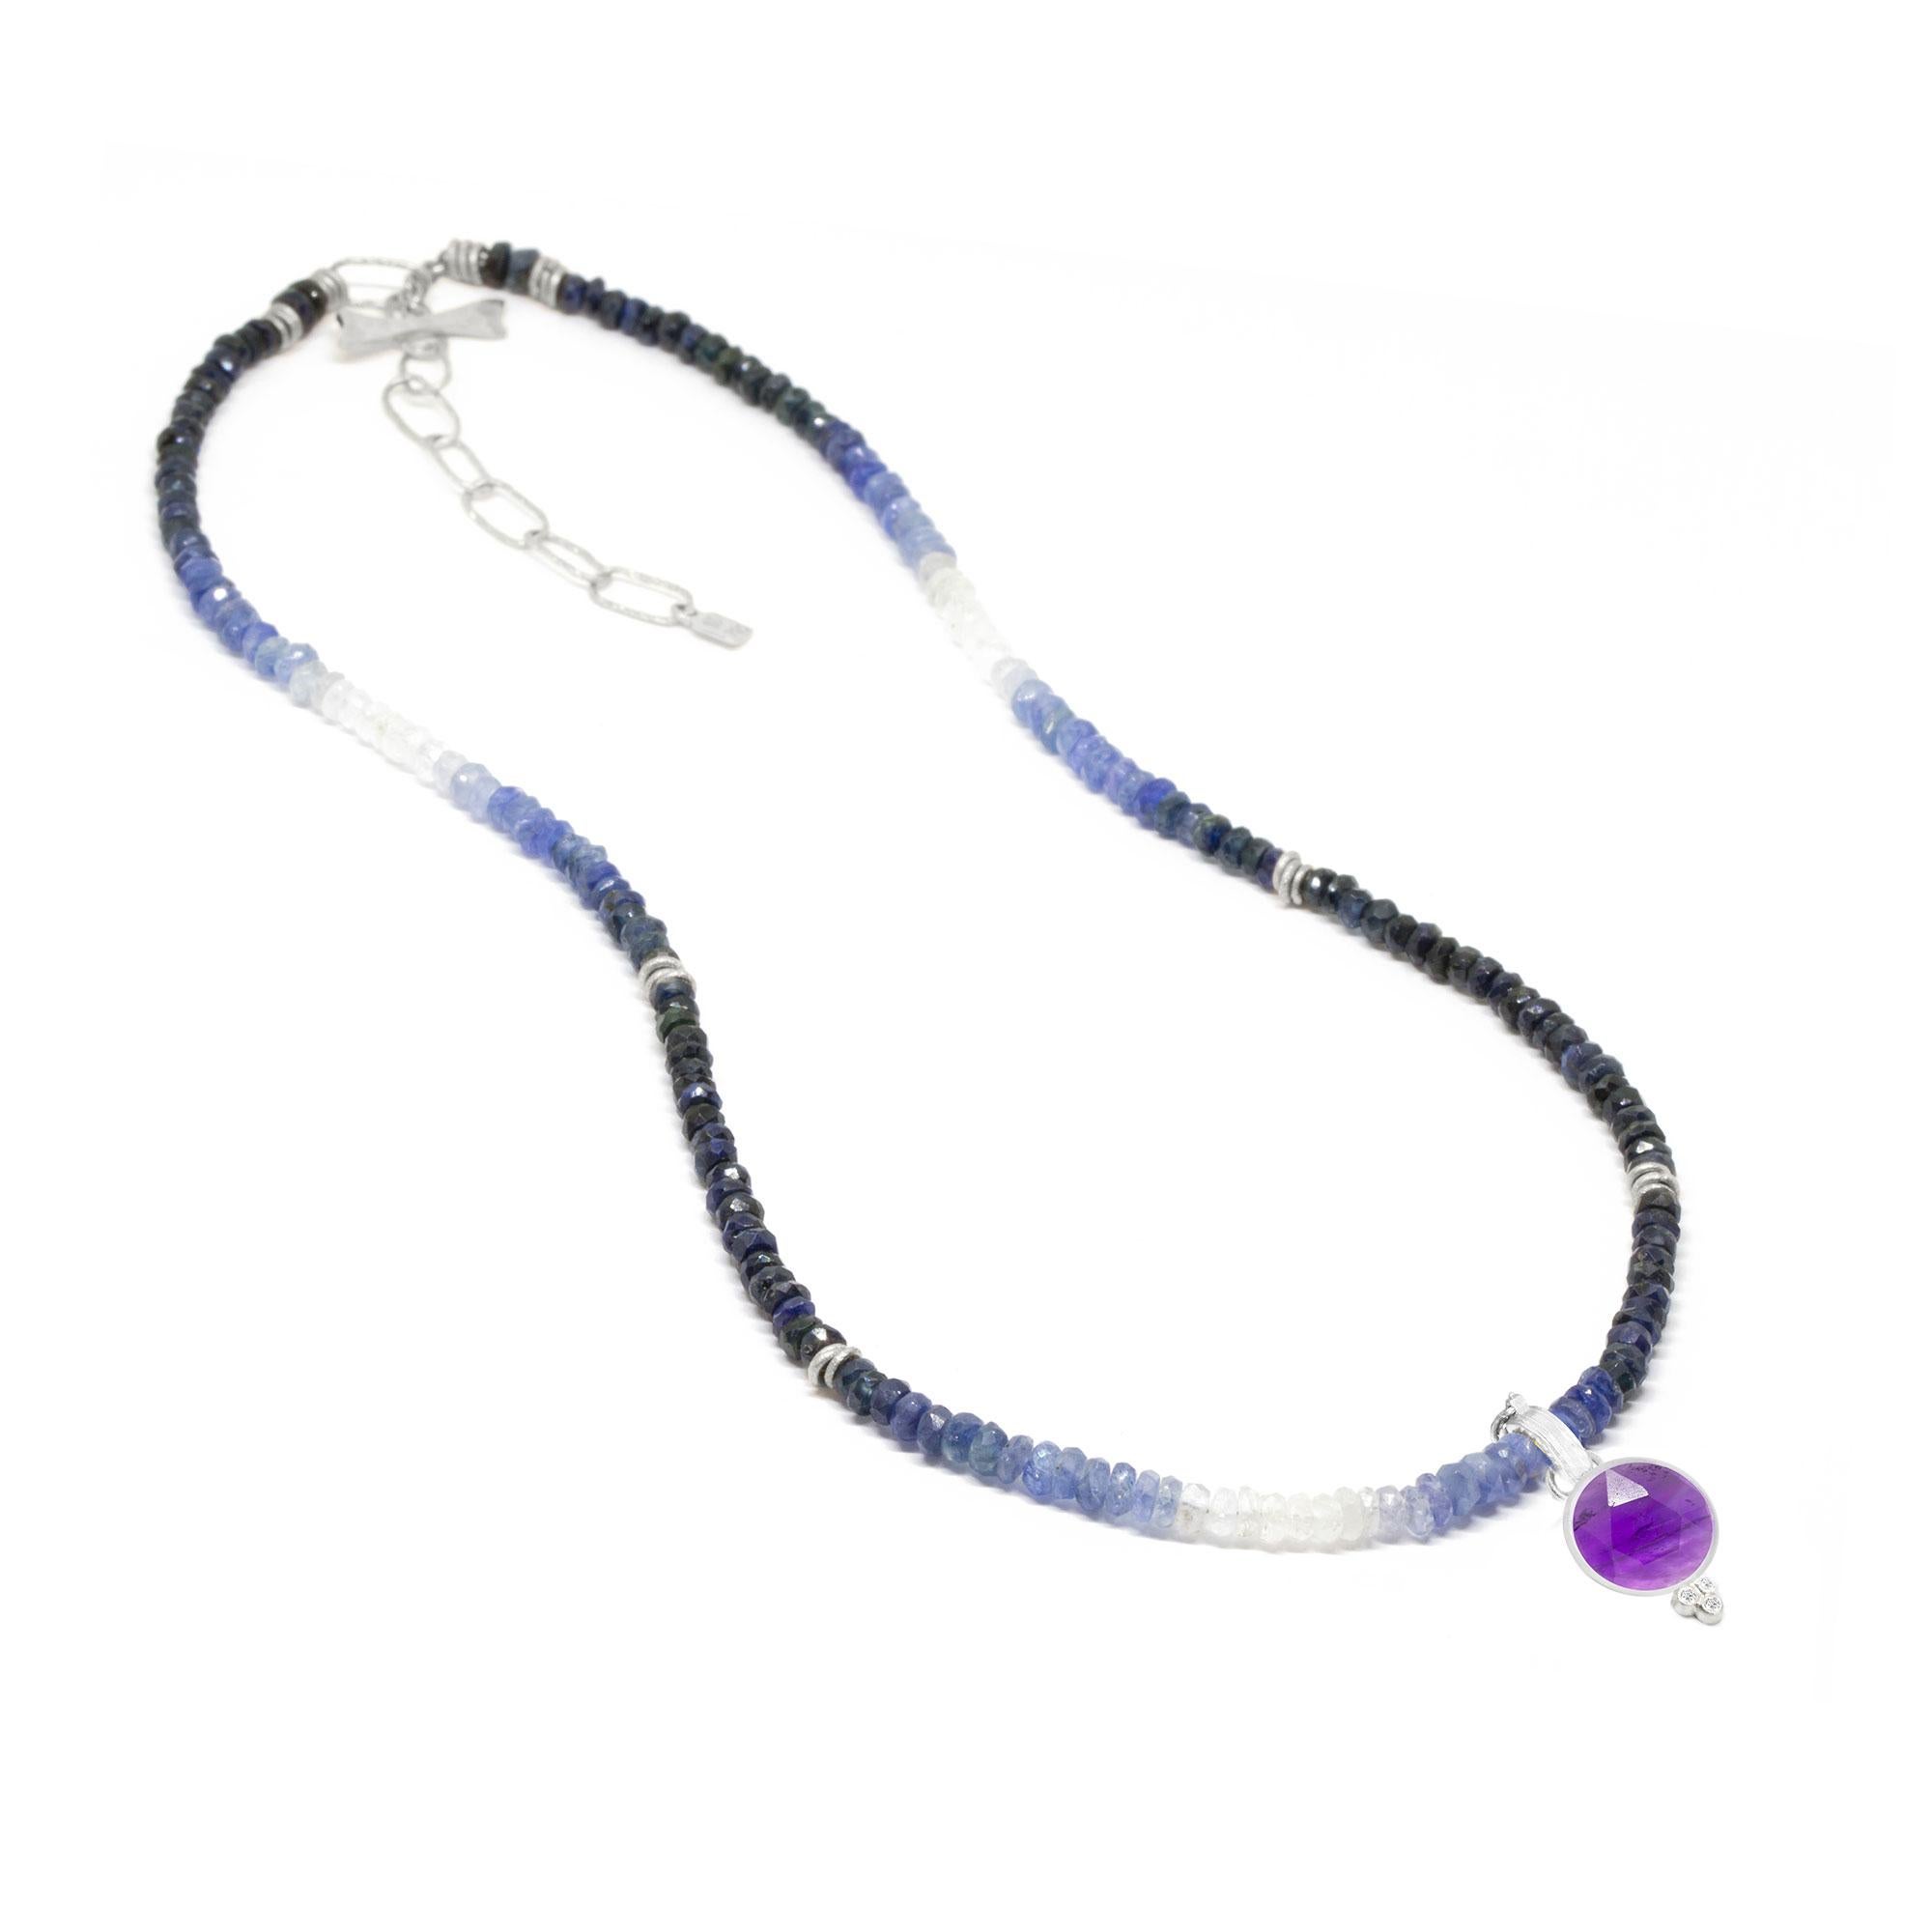 The best part about the Short Heritage Silver Necklette isn’t just that it can be worn long, doubled-up, or as a wrap bracelet (although that’s pretty cool). It’s that you can thread any of our Charms onto the sapphire beads—have fun playing with